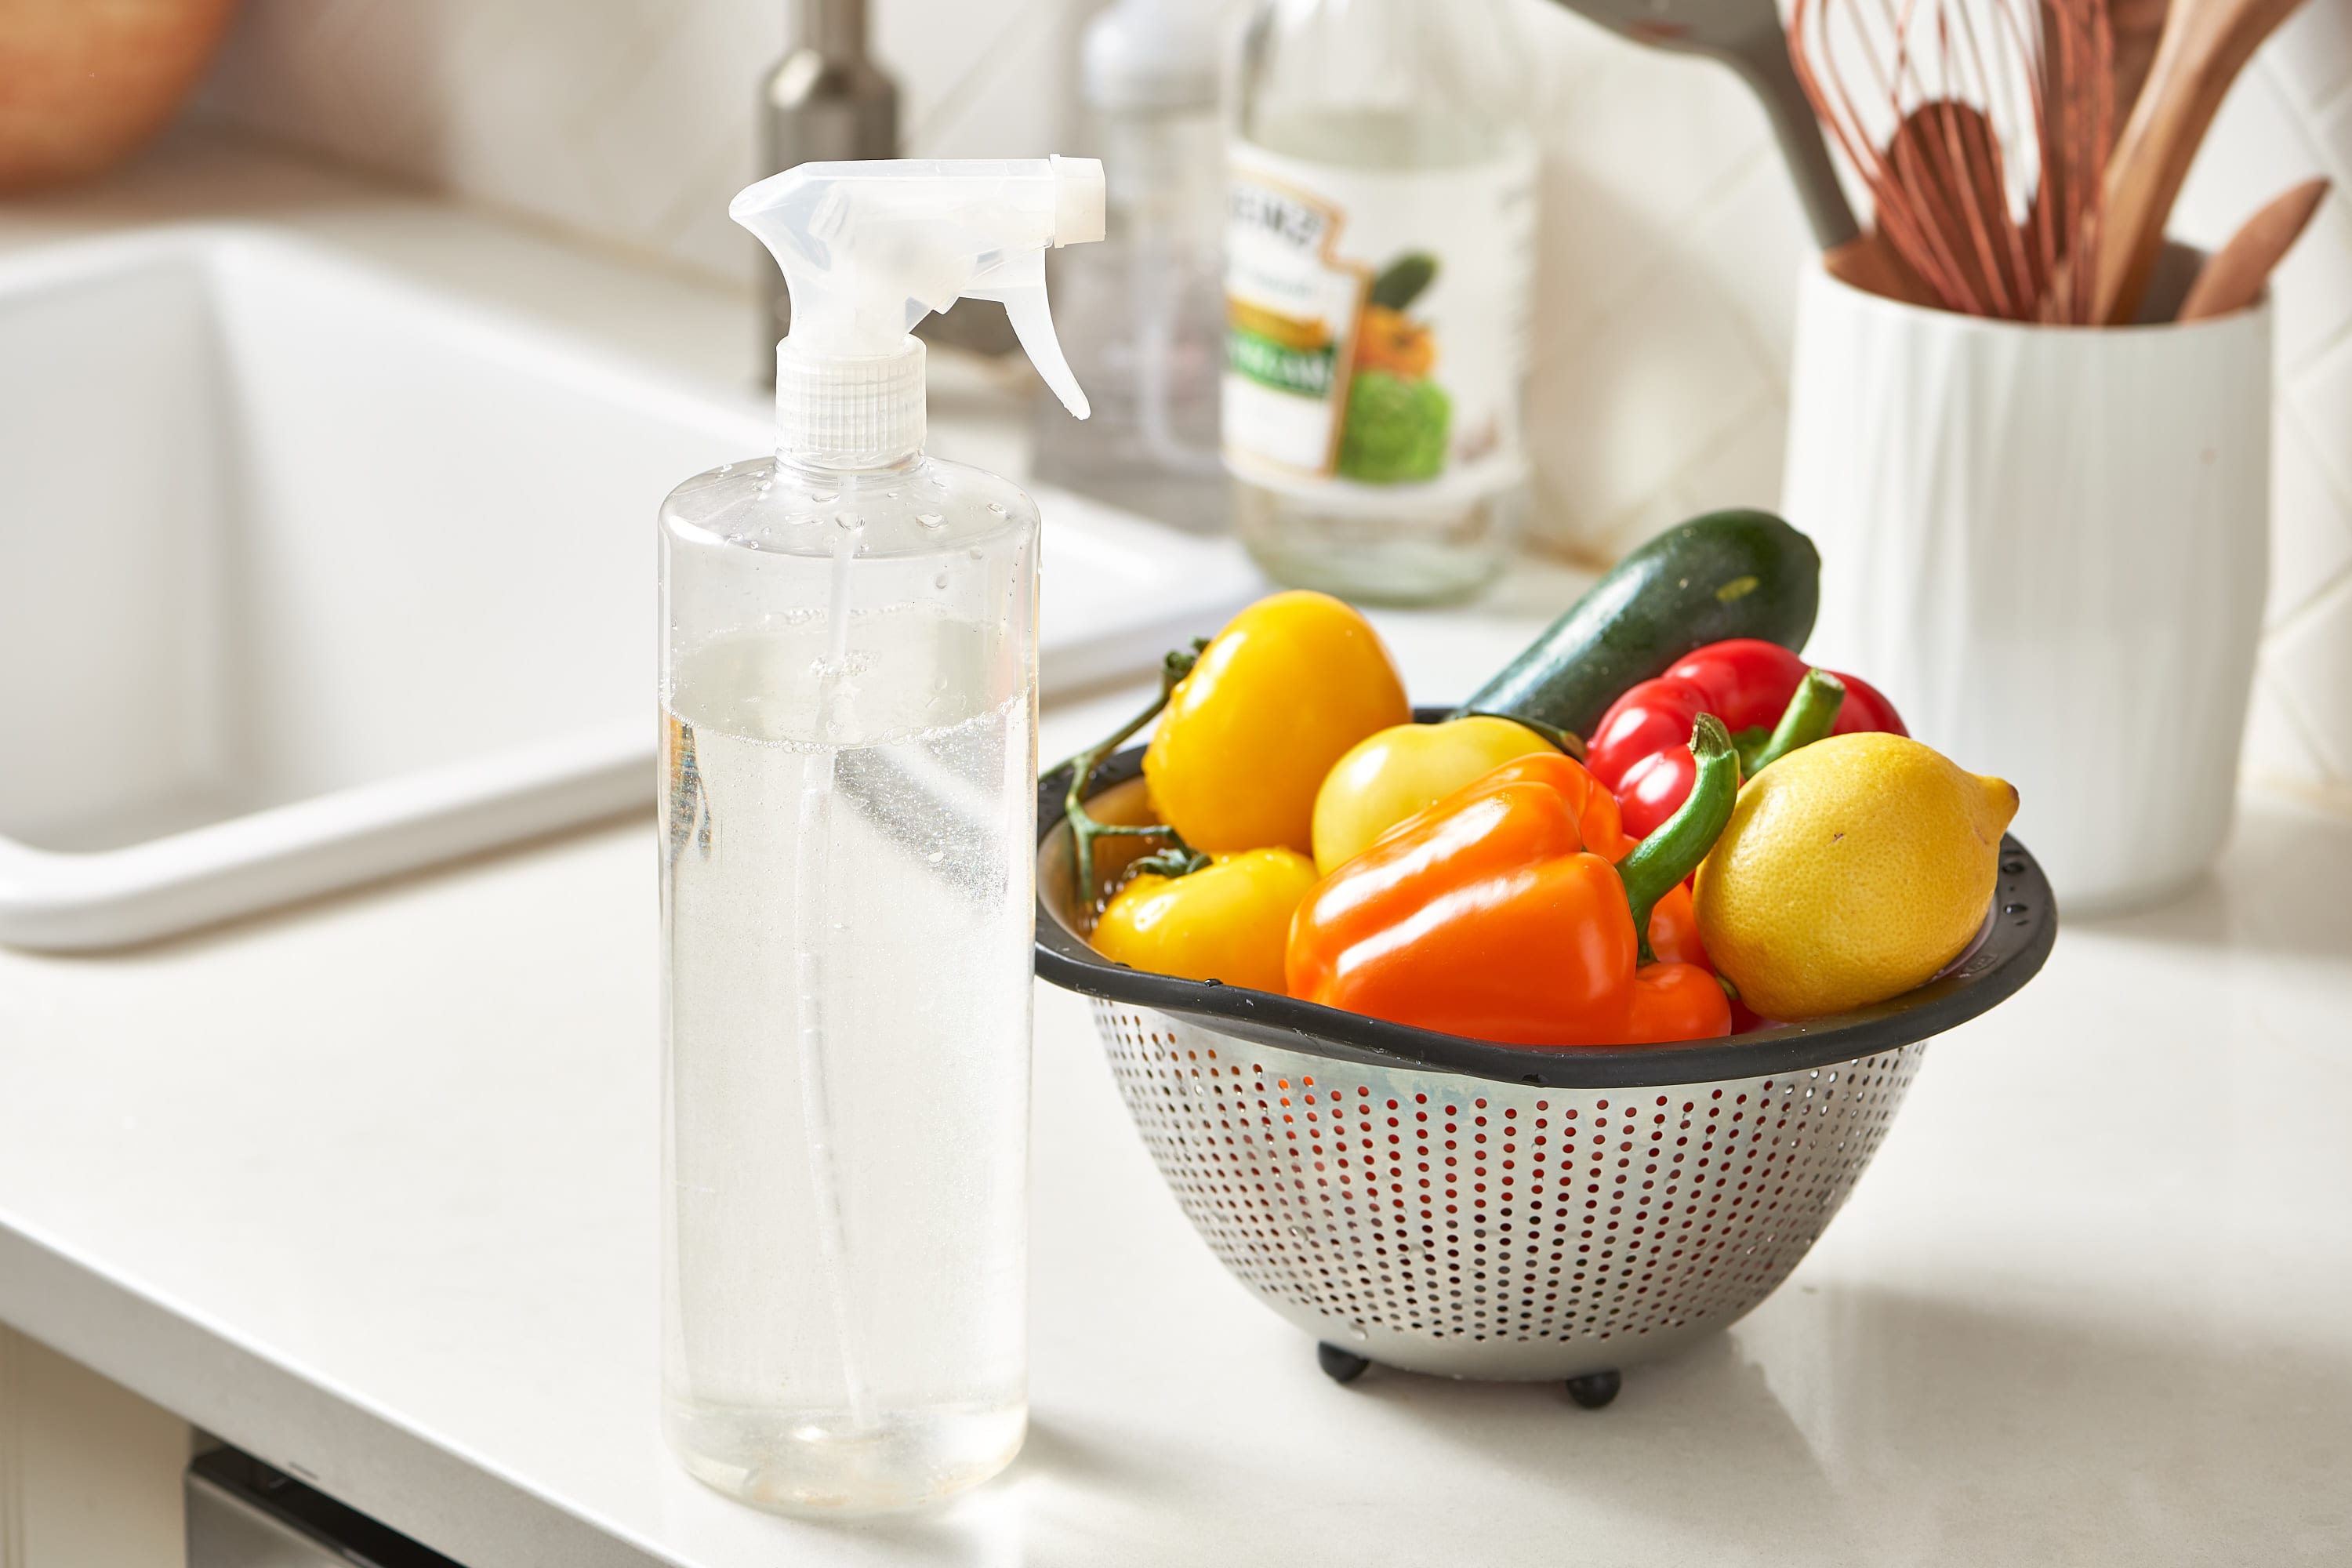 8 Tips To Properly Wash Fruit And Vegetable Produce Before